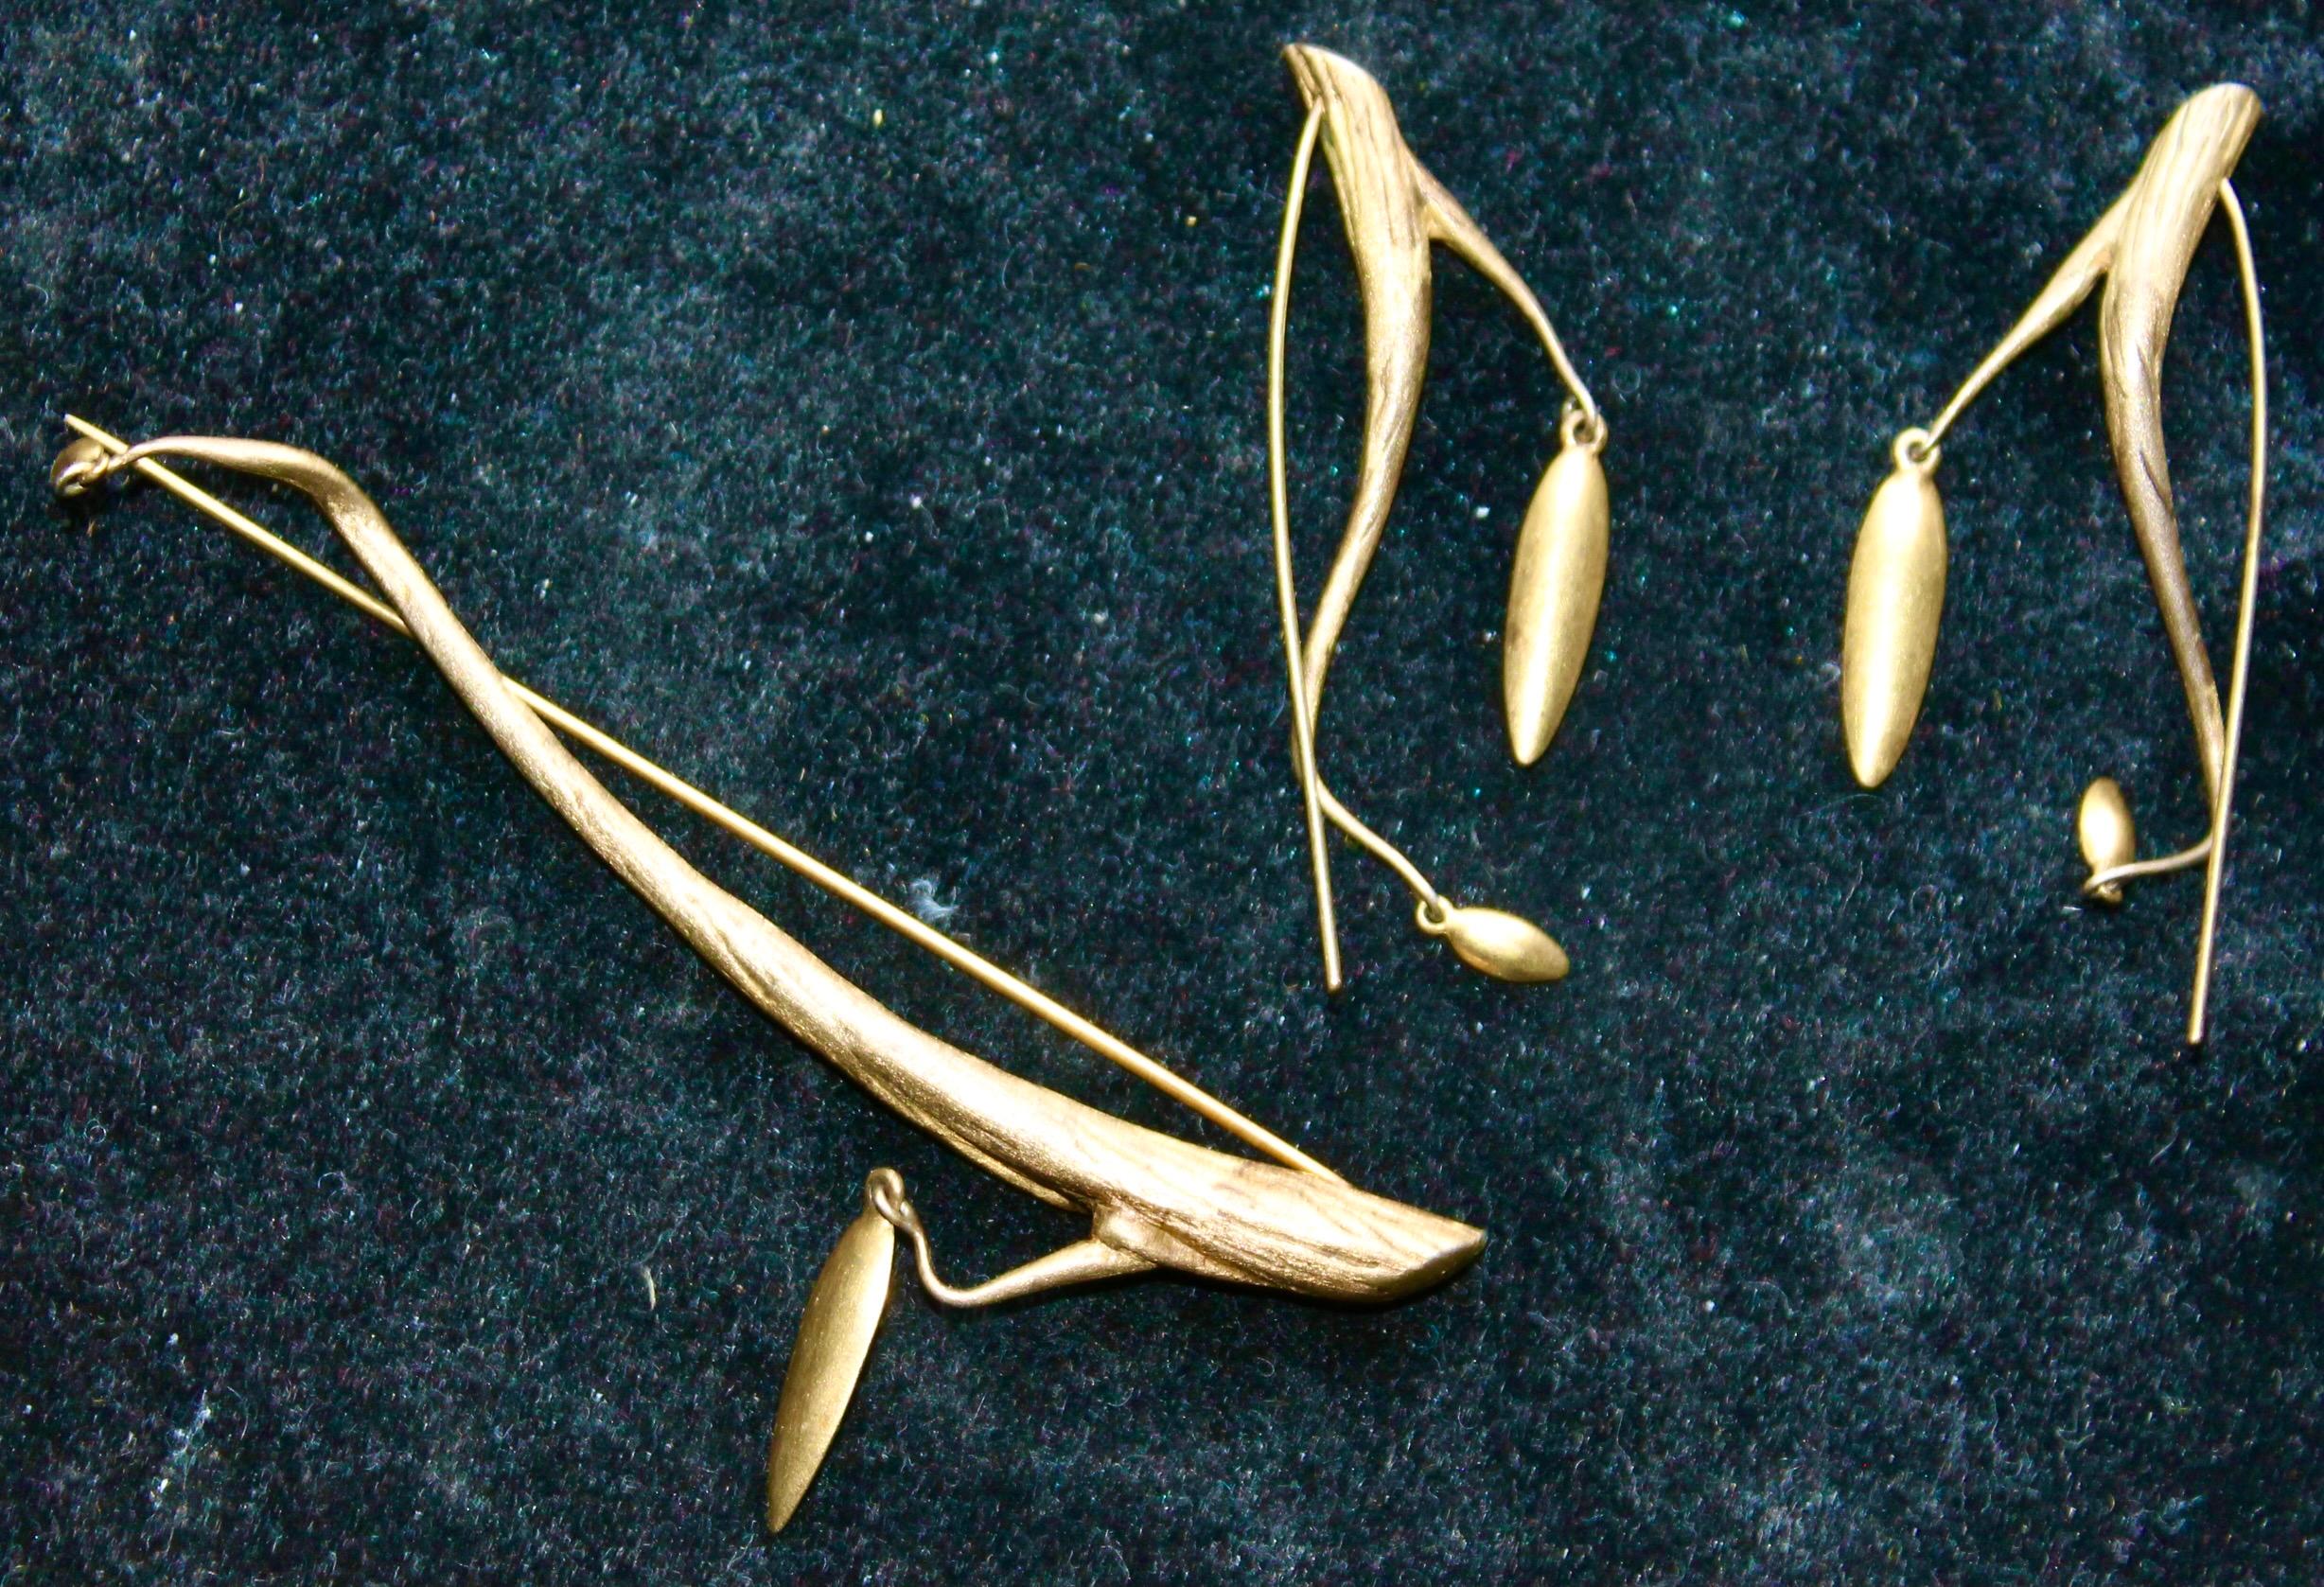 Form, proportion and balance, all come together with Meuhlings' imaginative approach
to natural organic form to create a highly original style.  This vintage 'twig and pod' brooch and earrings set in 18K gold plated bronze are important examples of